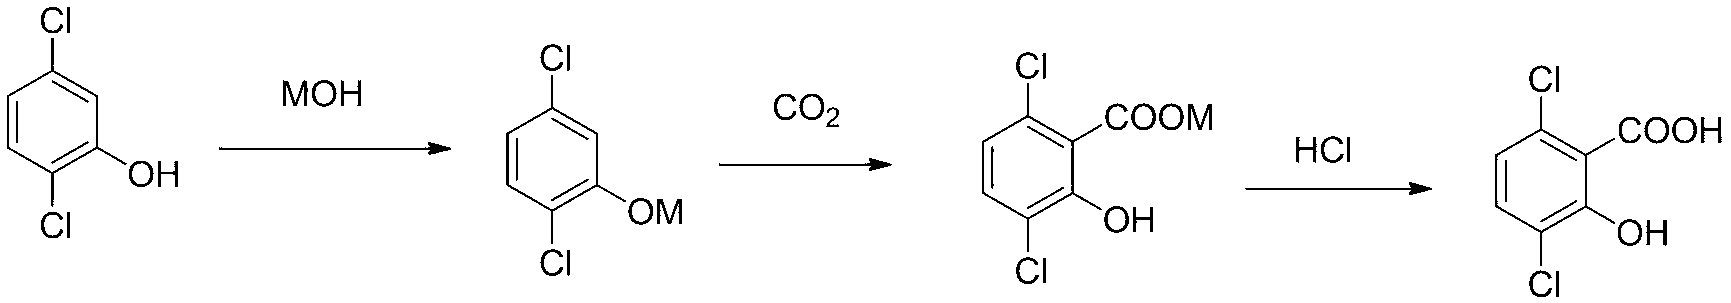 Synthetic method for 3,6-dichloro-2-hydroxybenzoic acid